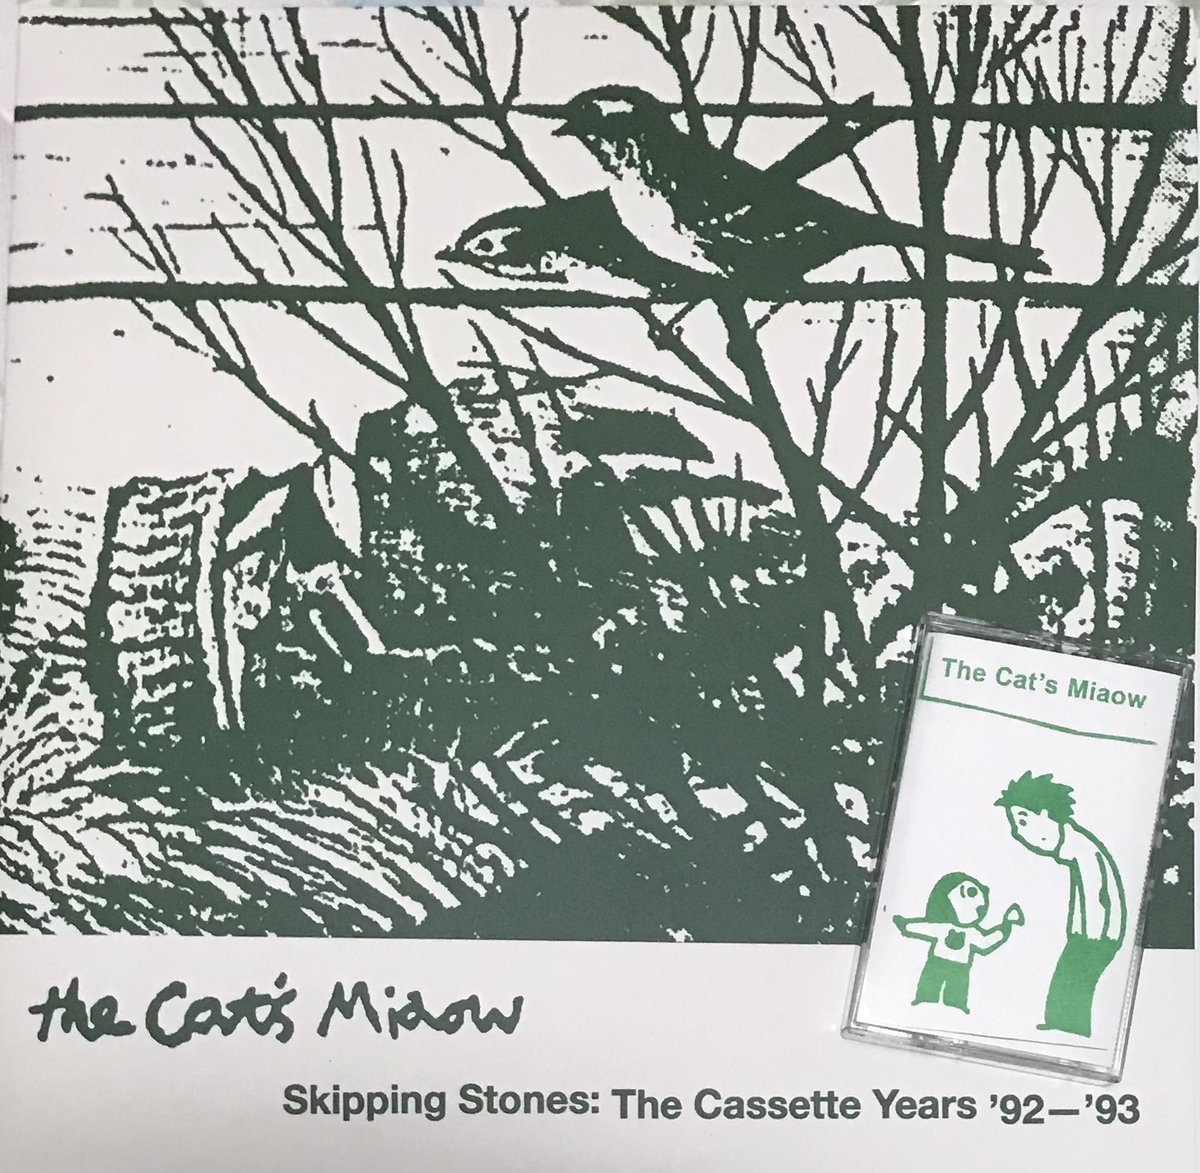 The Cat's Miaow-Skipping Stones ：The Cassette Years '92-'93 plus A Cassette of Covers